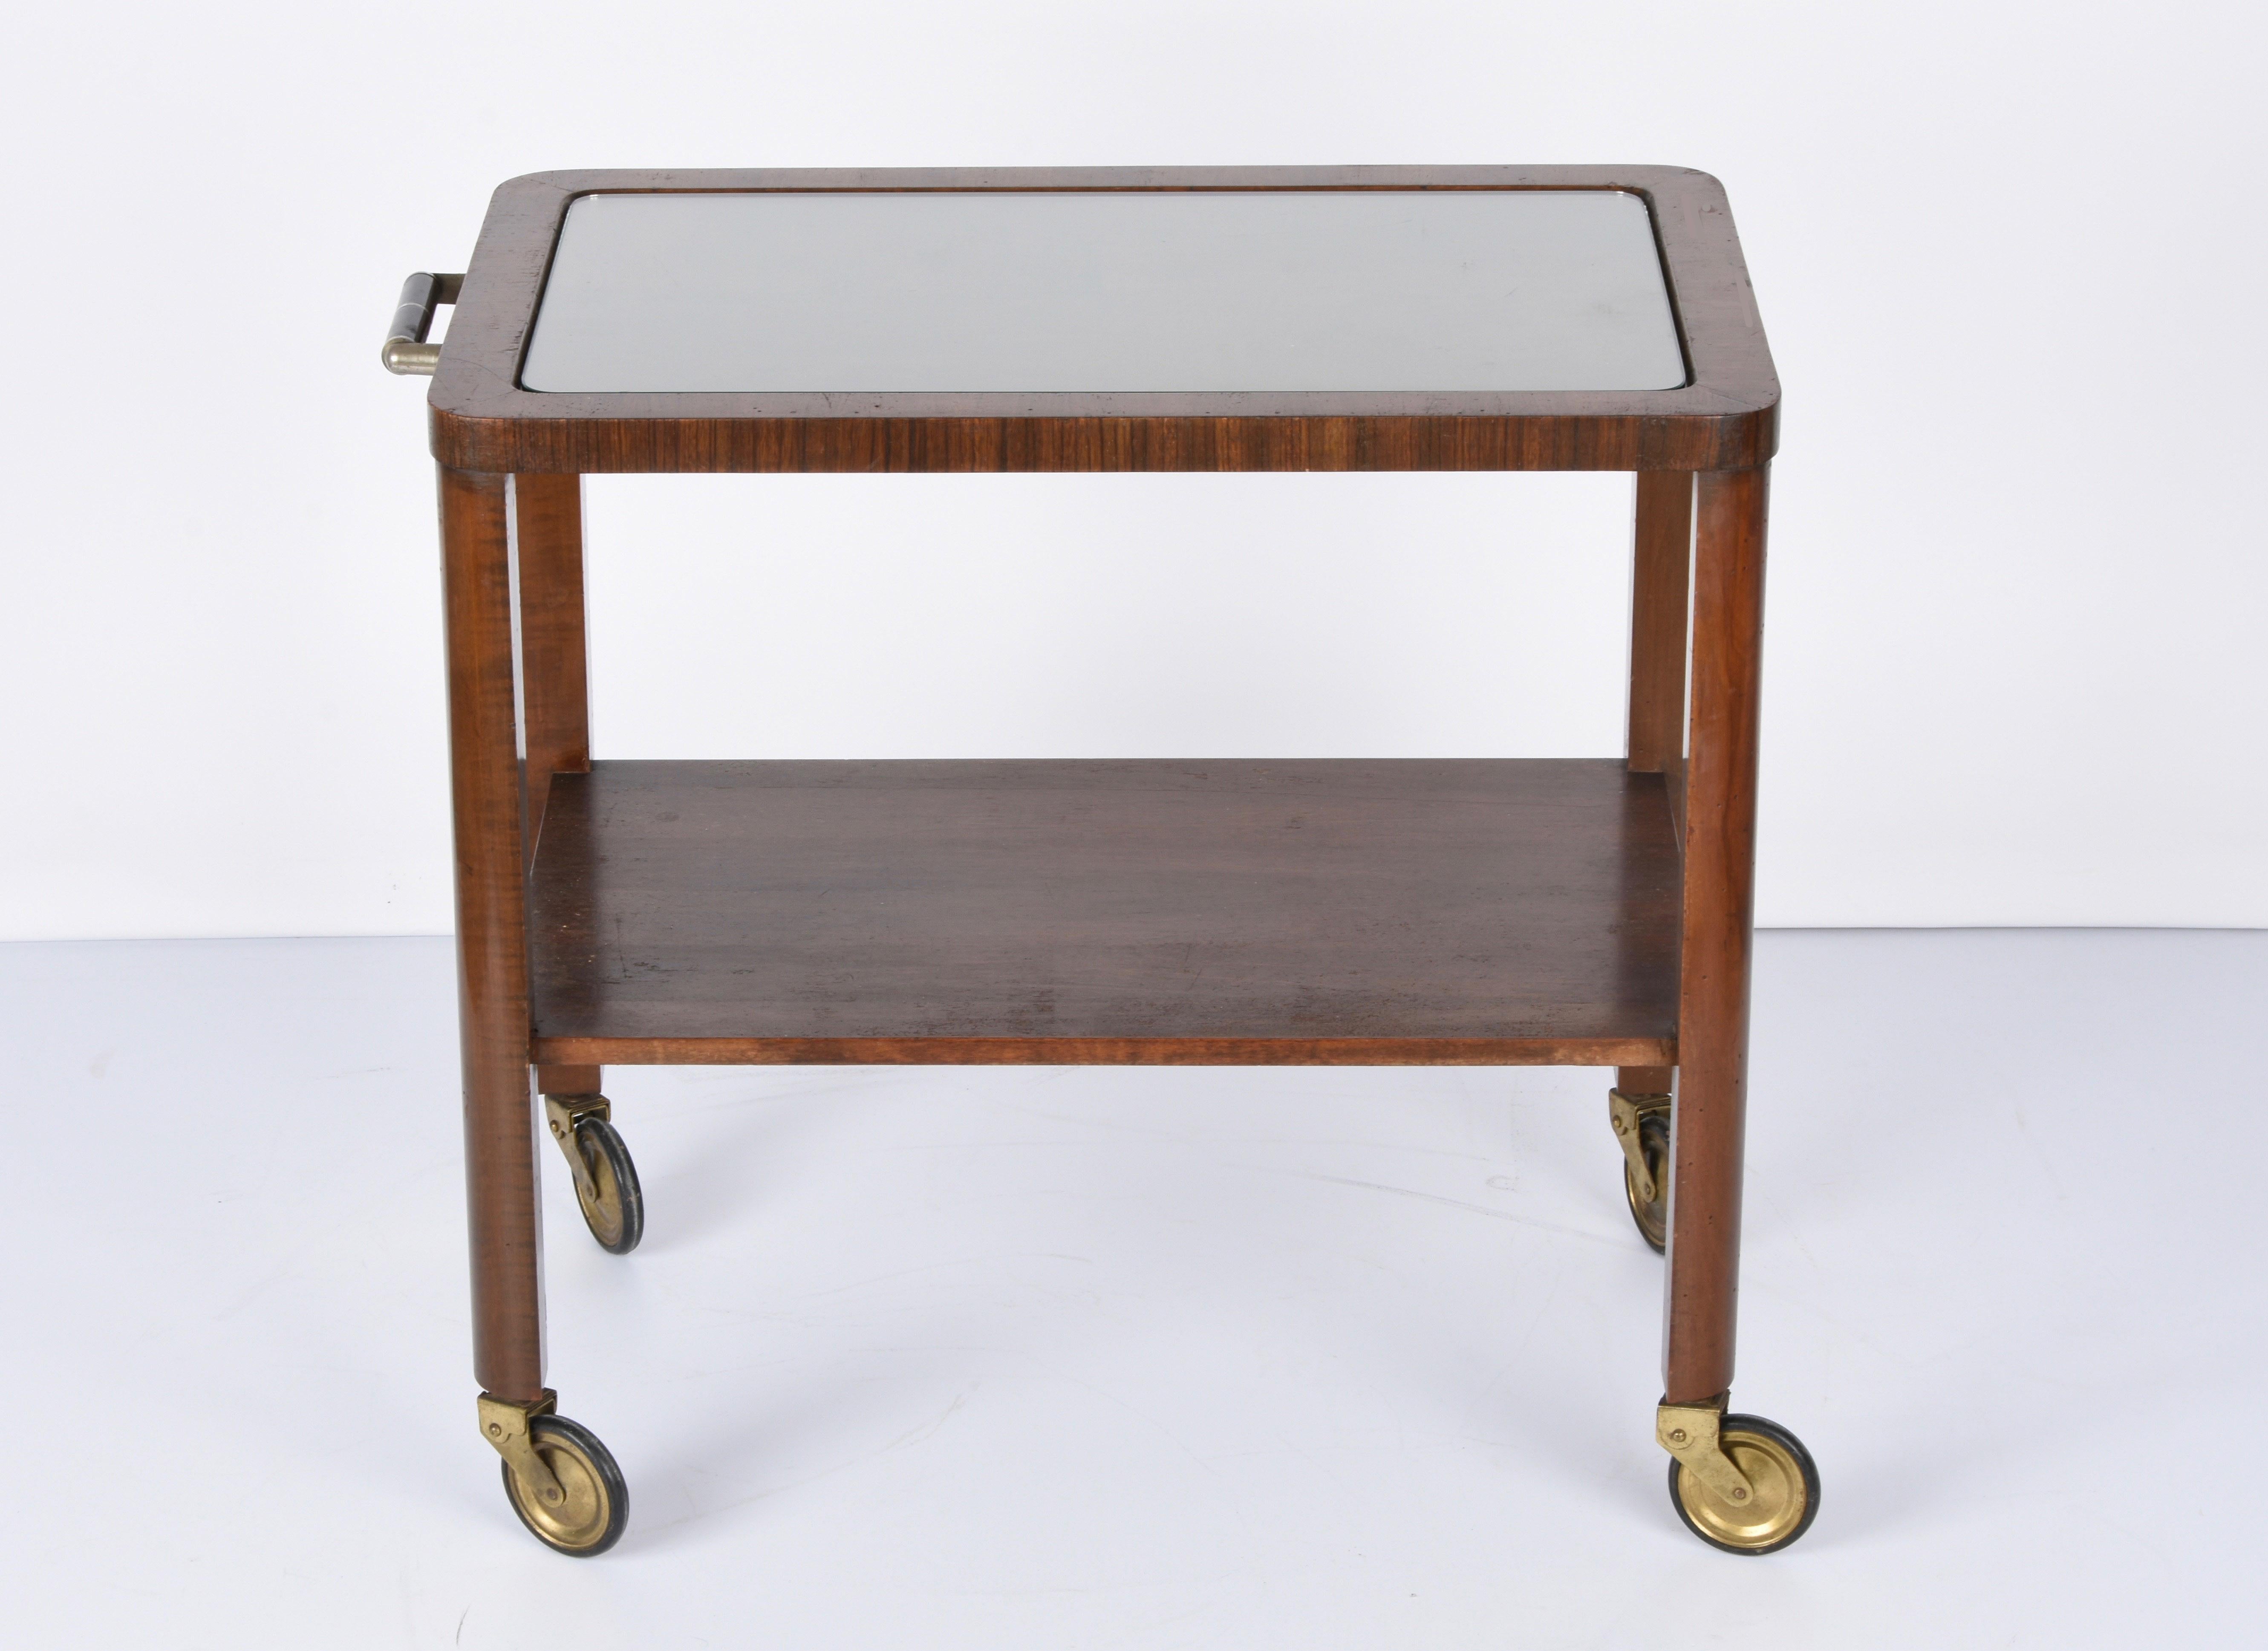 Art Deco Solid Walnut Wood and Glass Two-Levels Italian Trolley Bar Cart, 1940s For Sale 4